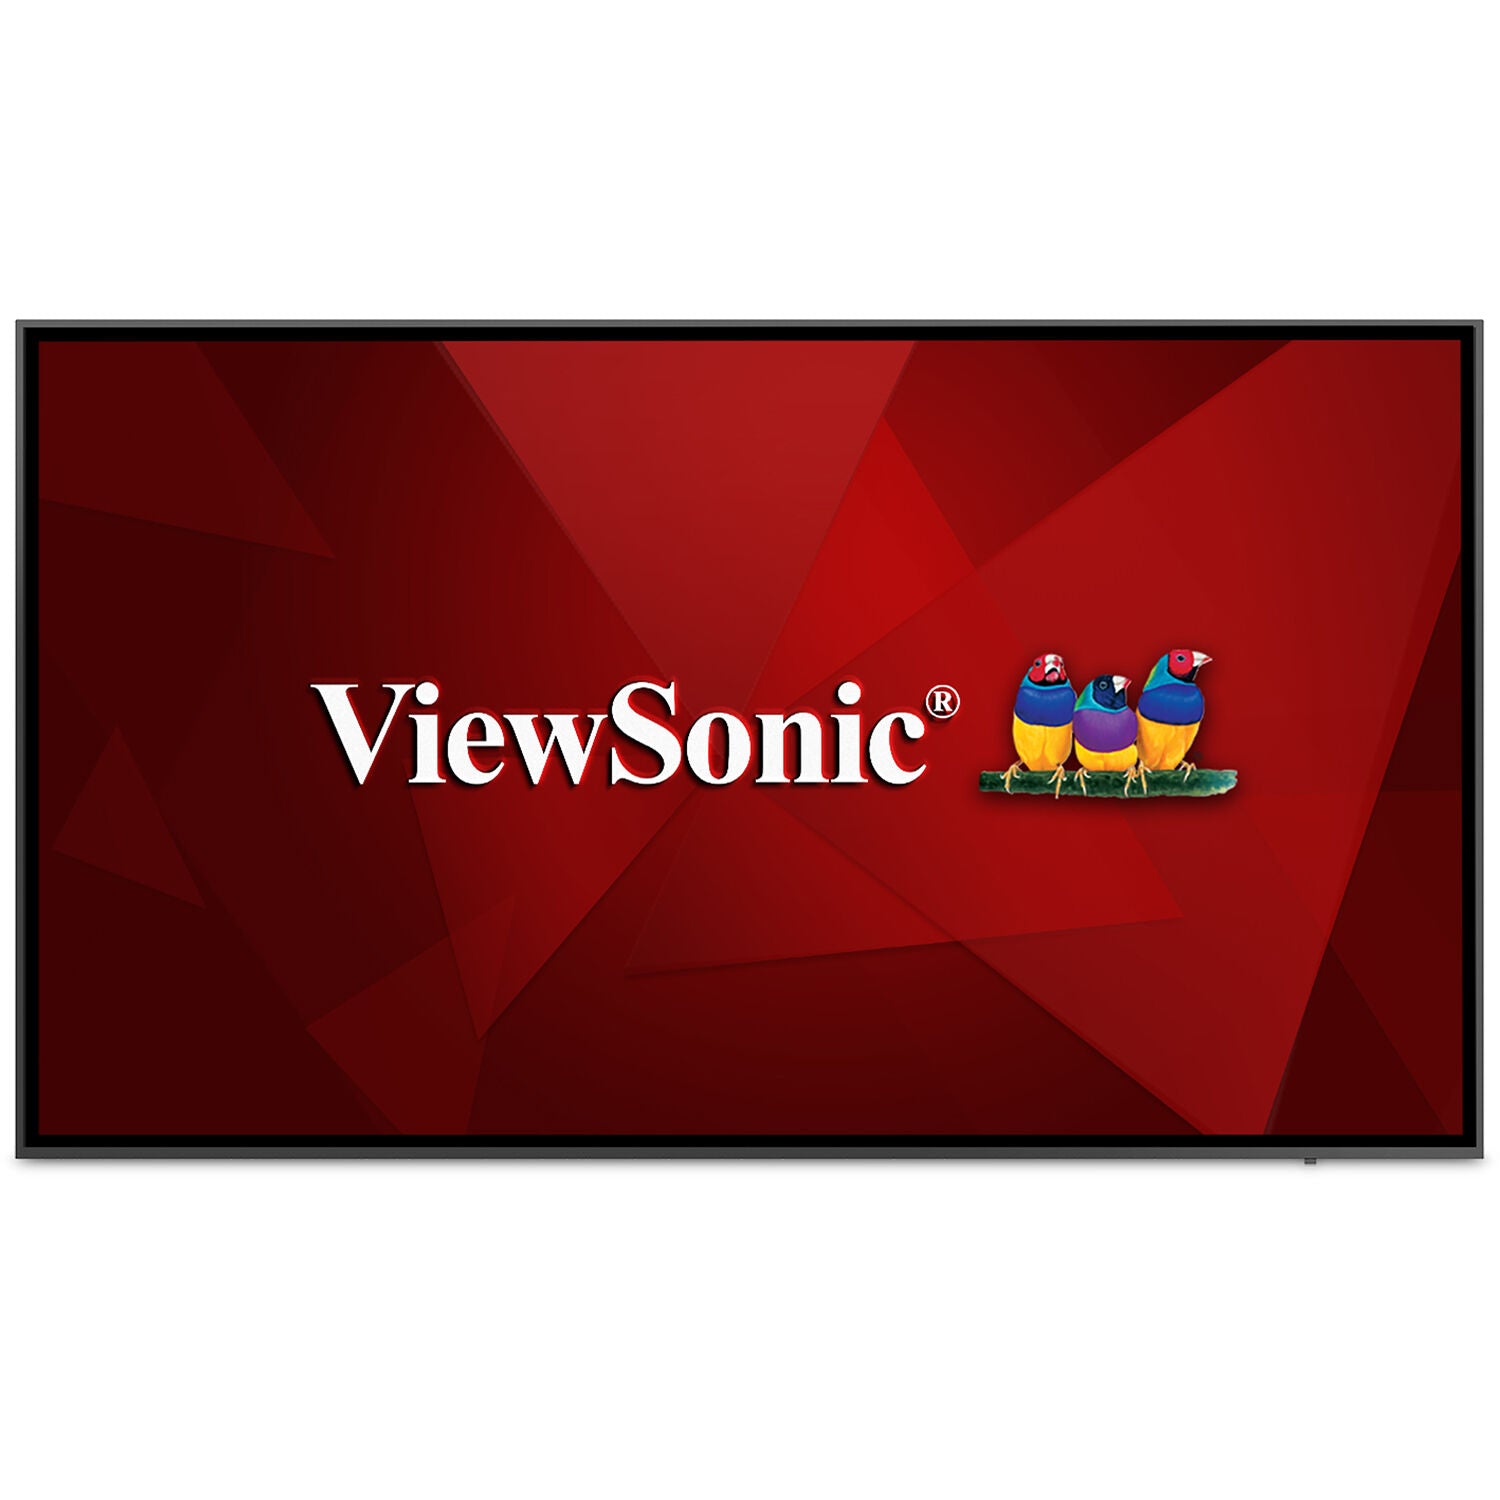 ViewSonic CDE7520-W-R 75" Class 4K UHD Wireless Digital Signage and Conference Room LED Display - Certified Refurbished